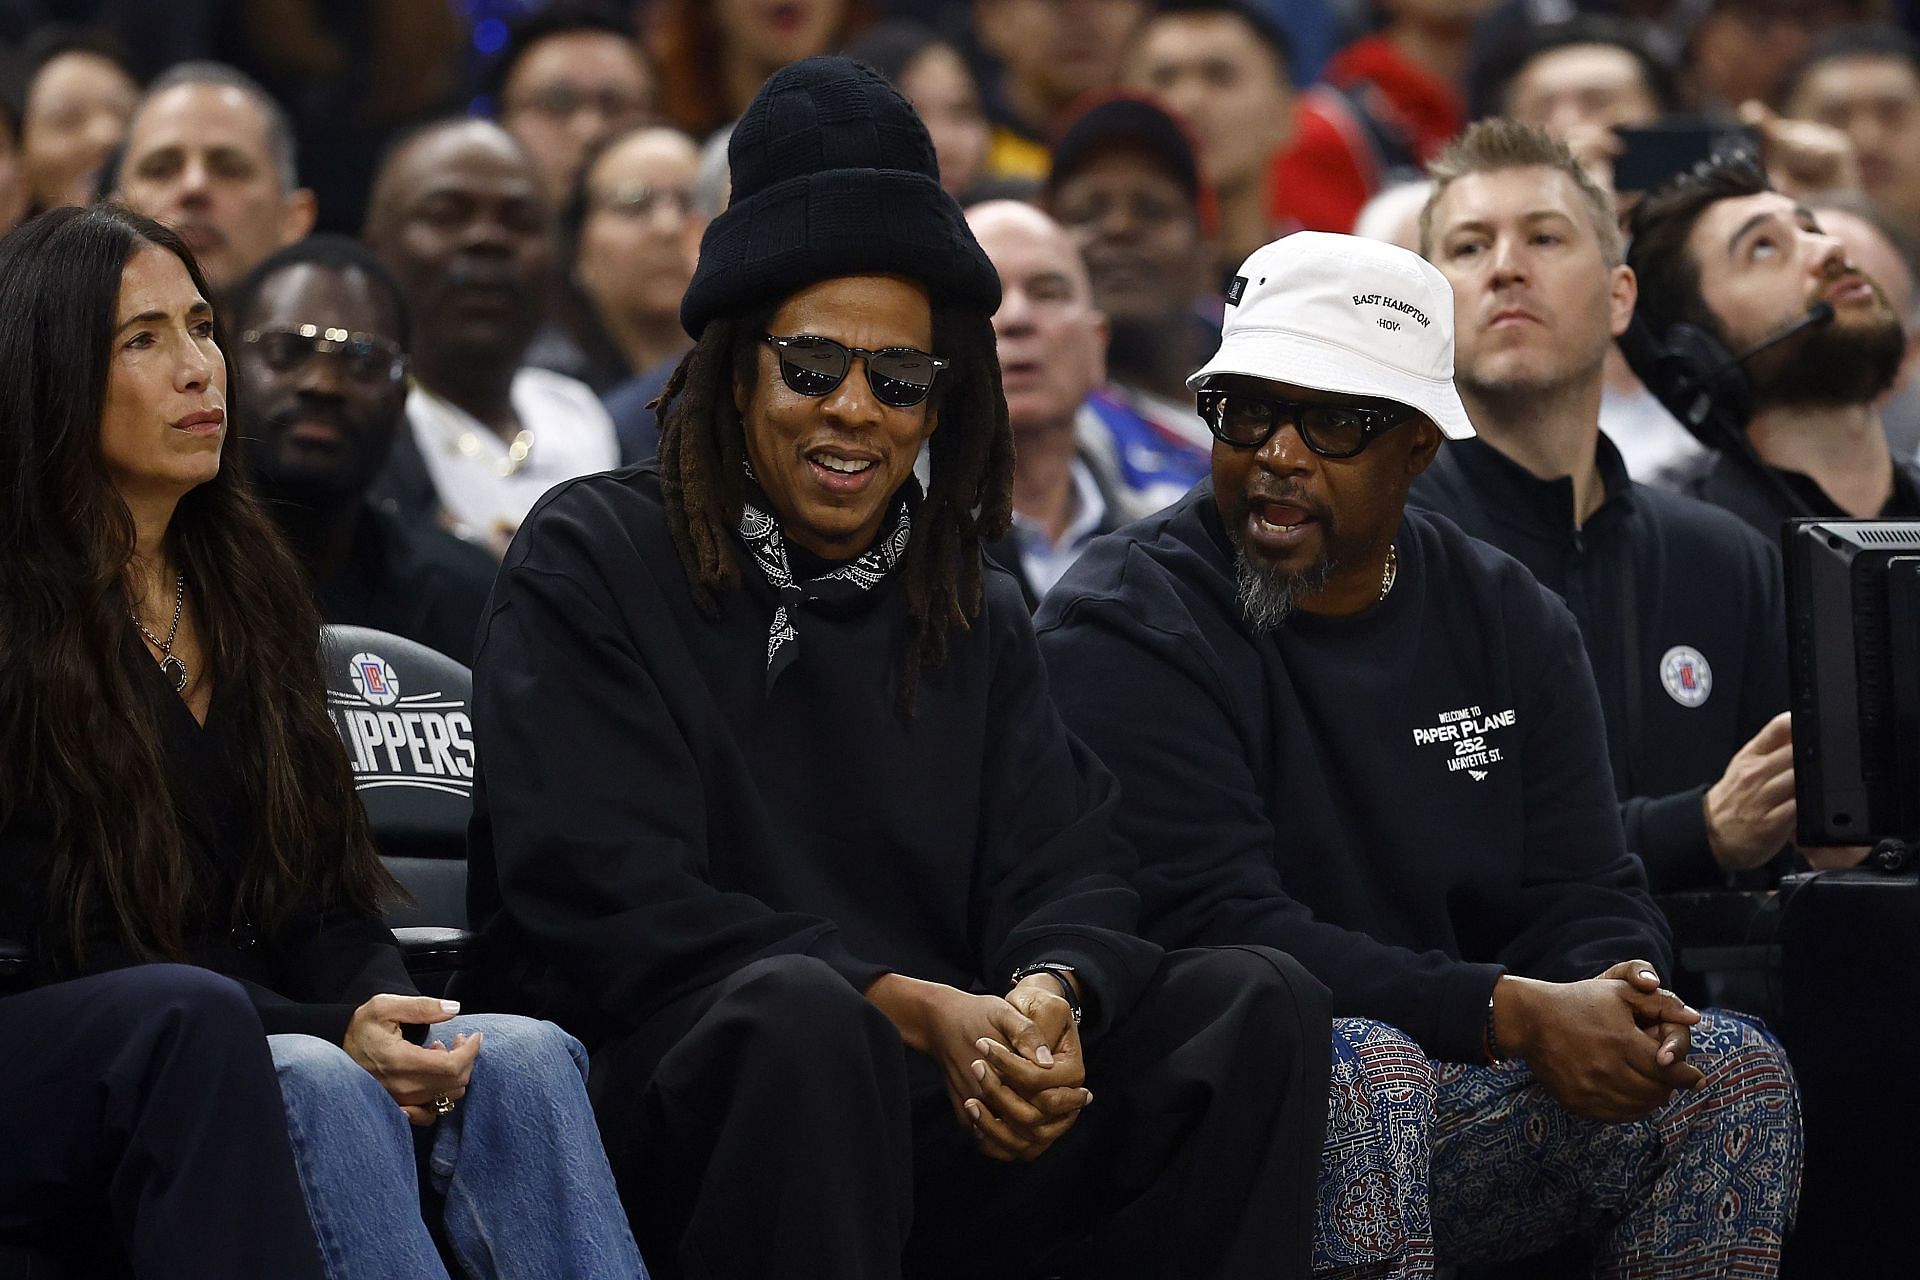 Jay-Z watched the LA Lakers beat the LA Clippers on Wednesday.